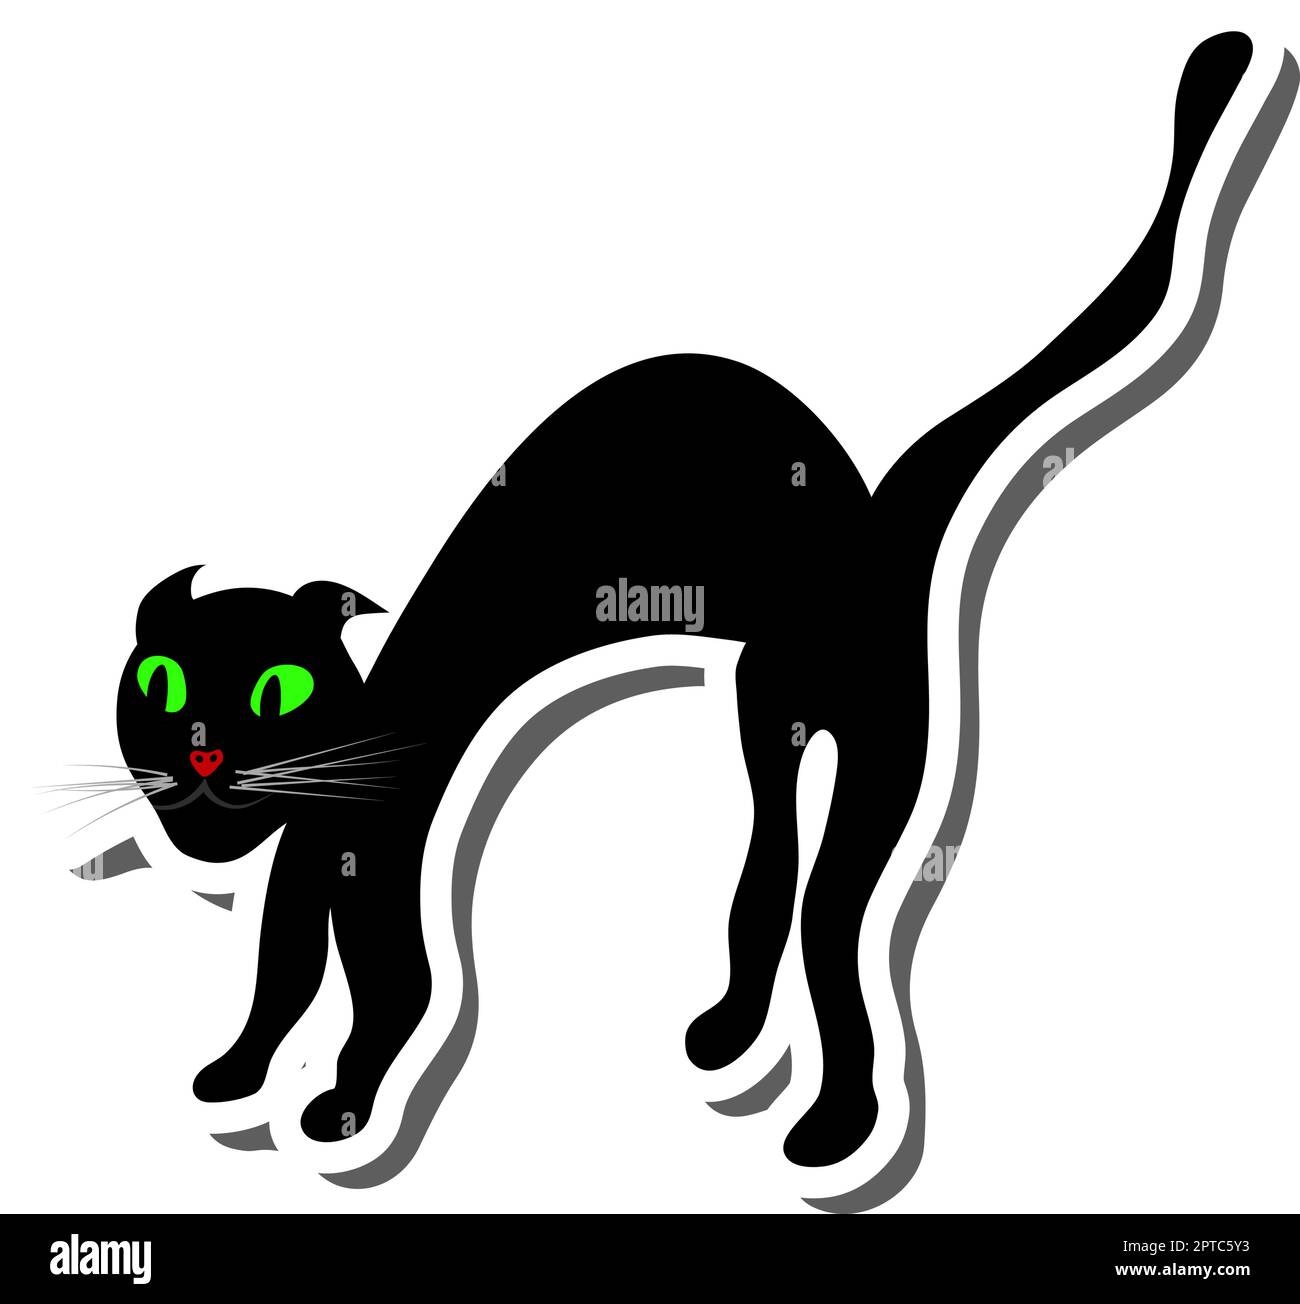 Black cat with arched back line and solid icon, halloween concept